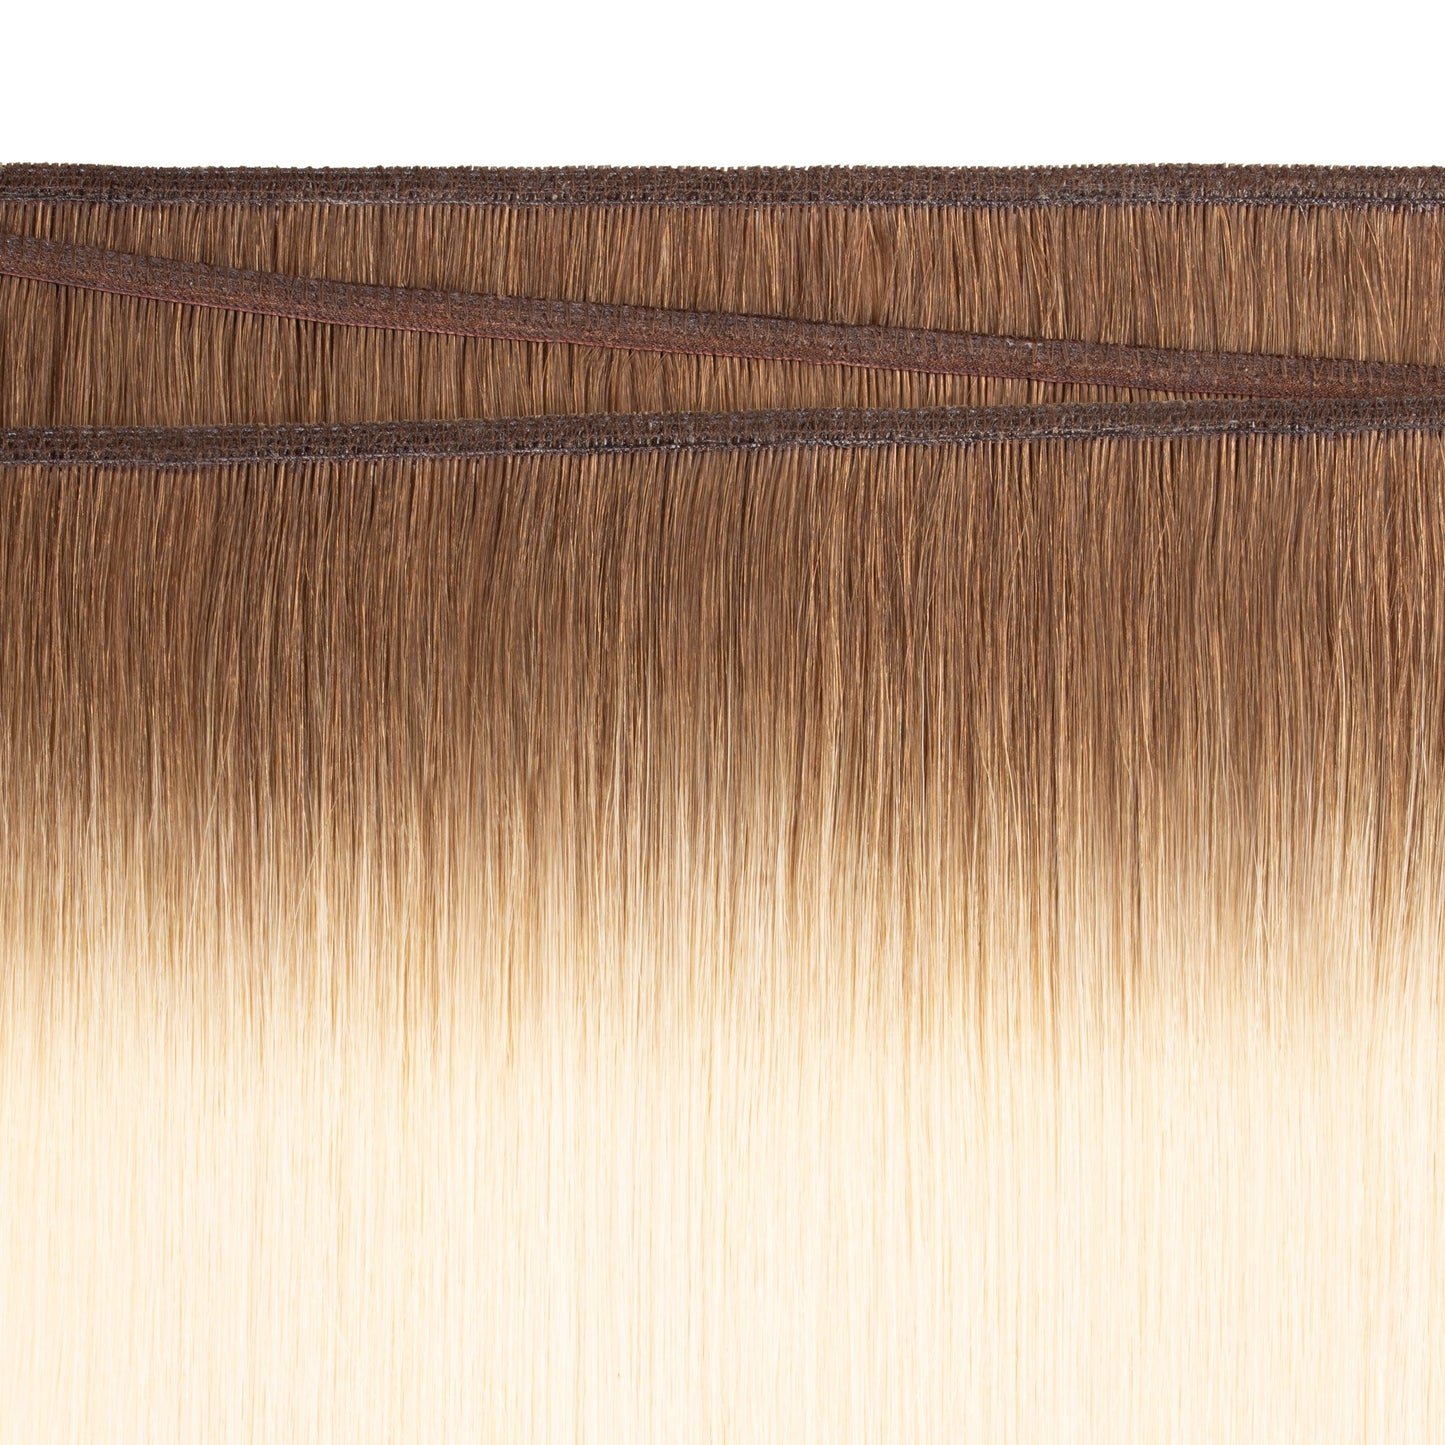 Ombre T4/60 Machine weft Hair Extension